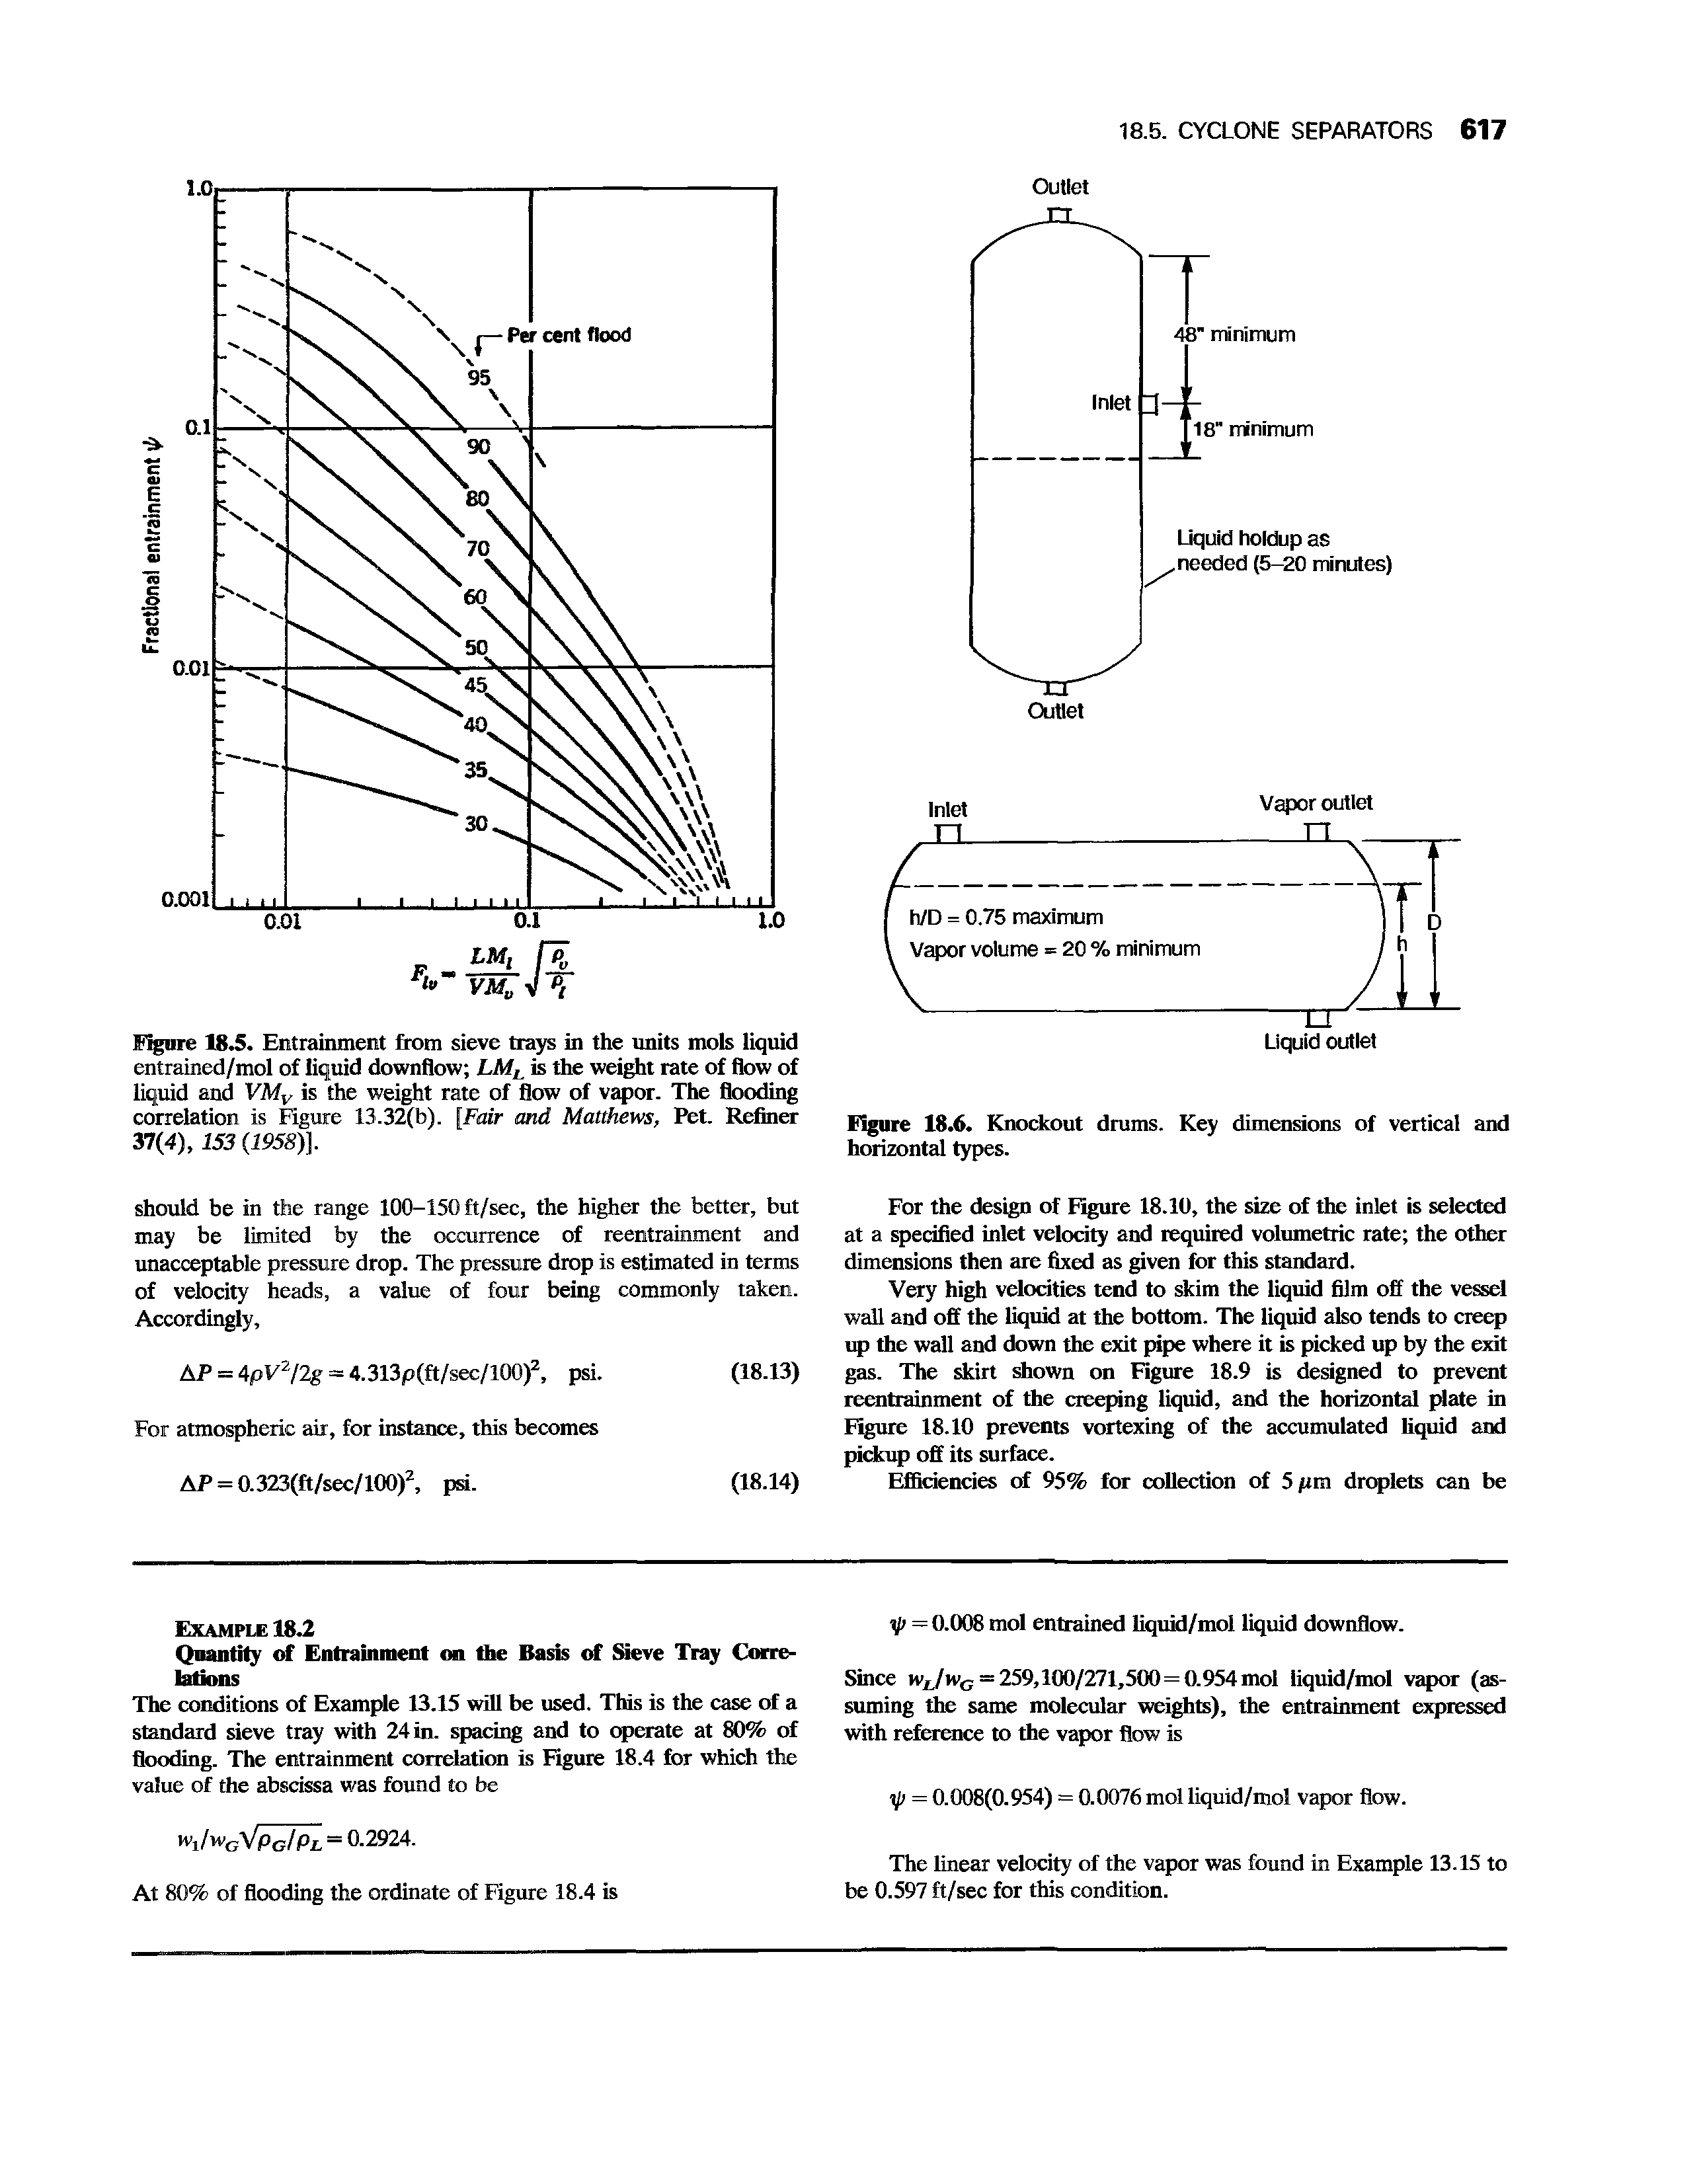 Figure 18.5. Entrainment from sieve trays in the units mols liquid entrained/mol of liquid downflow LM, is the weight rate of flow of liquid and VMv is the weight rate of flow of vapor. The flooding correlation is Figure 13.32(b). [Fair and Matthews, Pet. Refiner 37(4), 153 (195S)].